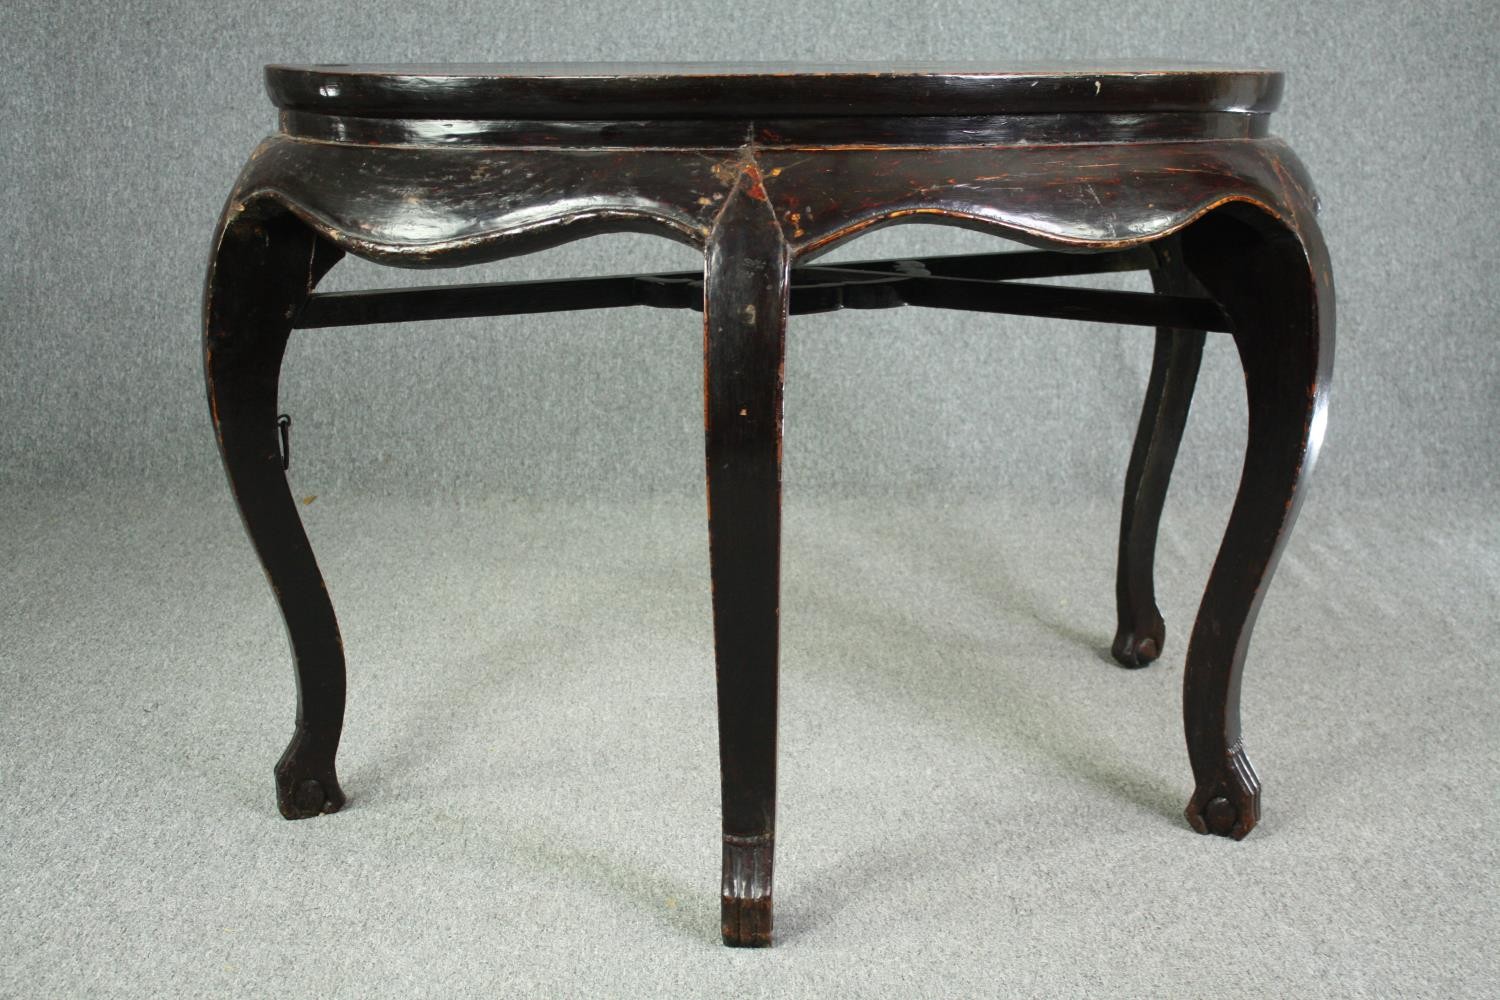 A substantial Chinese lacquered hardwood console table, possibly 19th century. H.84 W.120 D.59cm. - Image 5 of 13